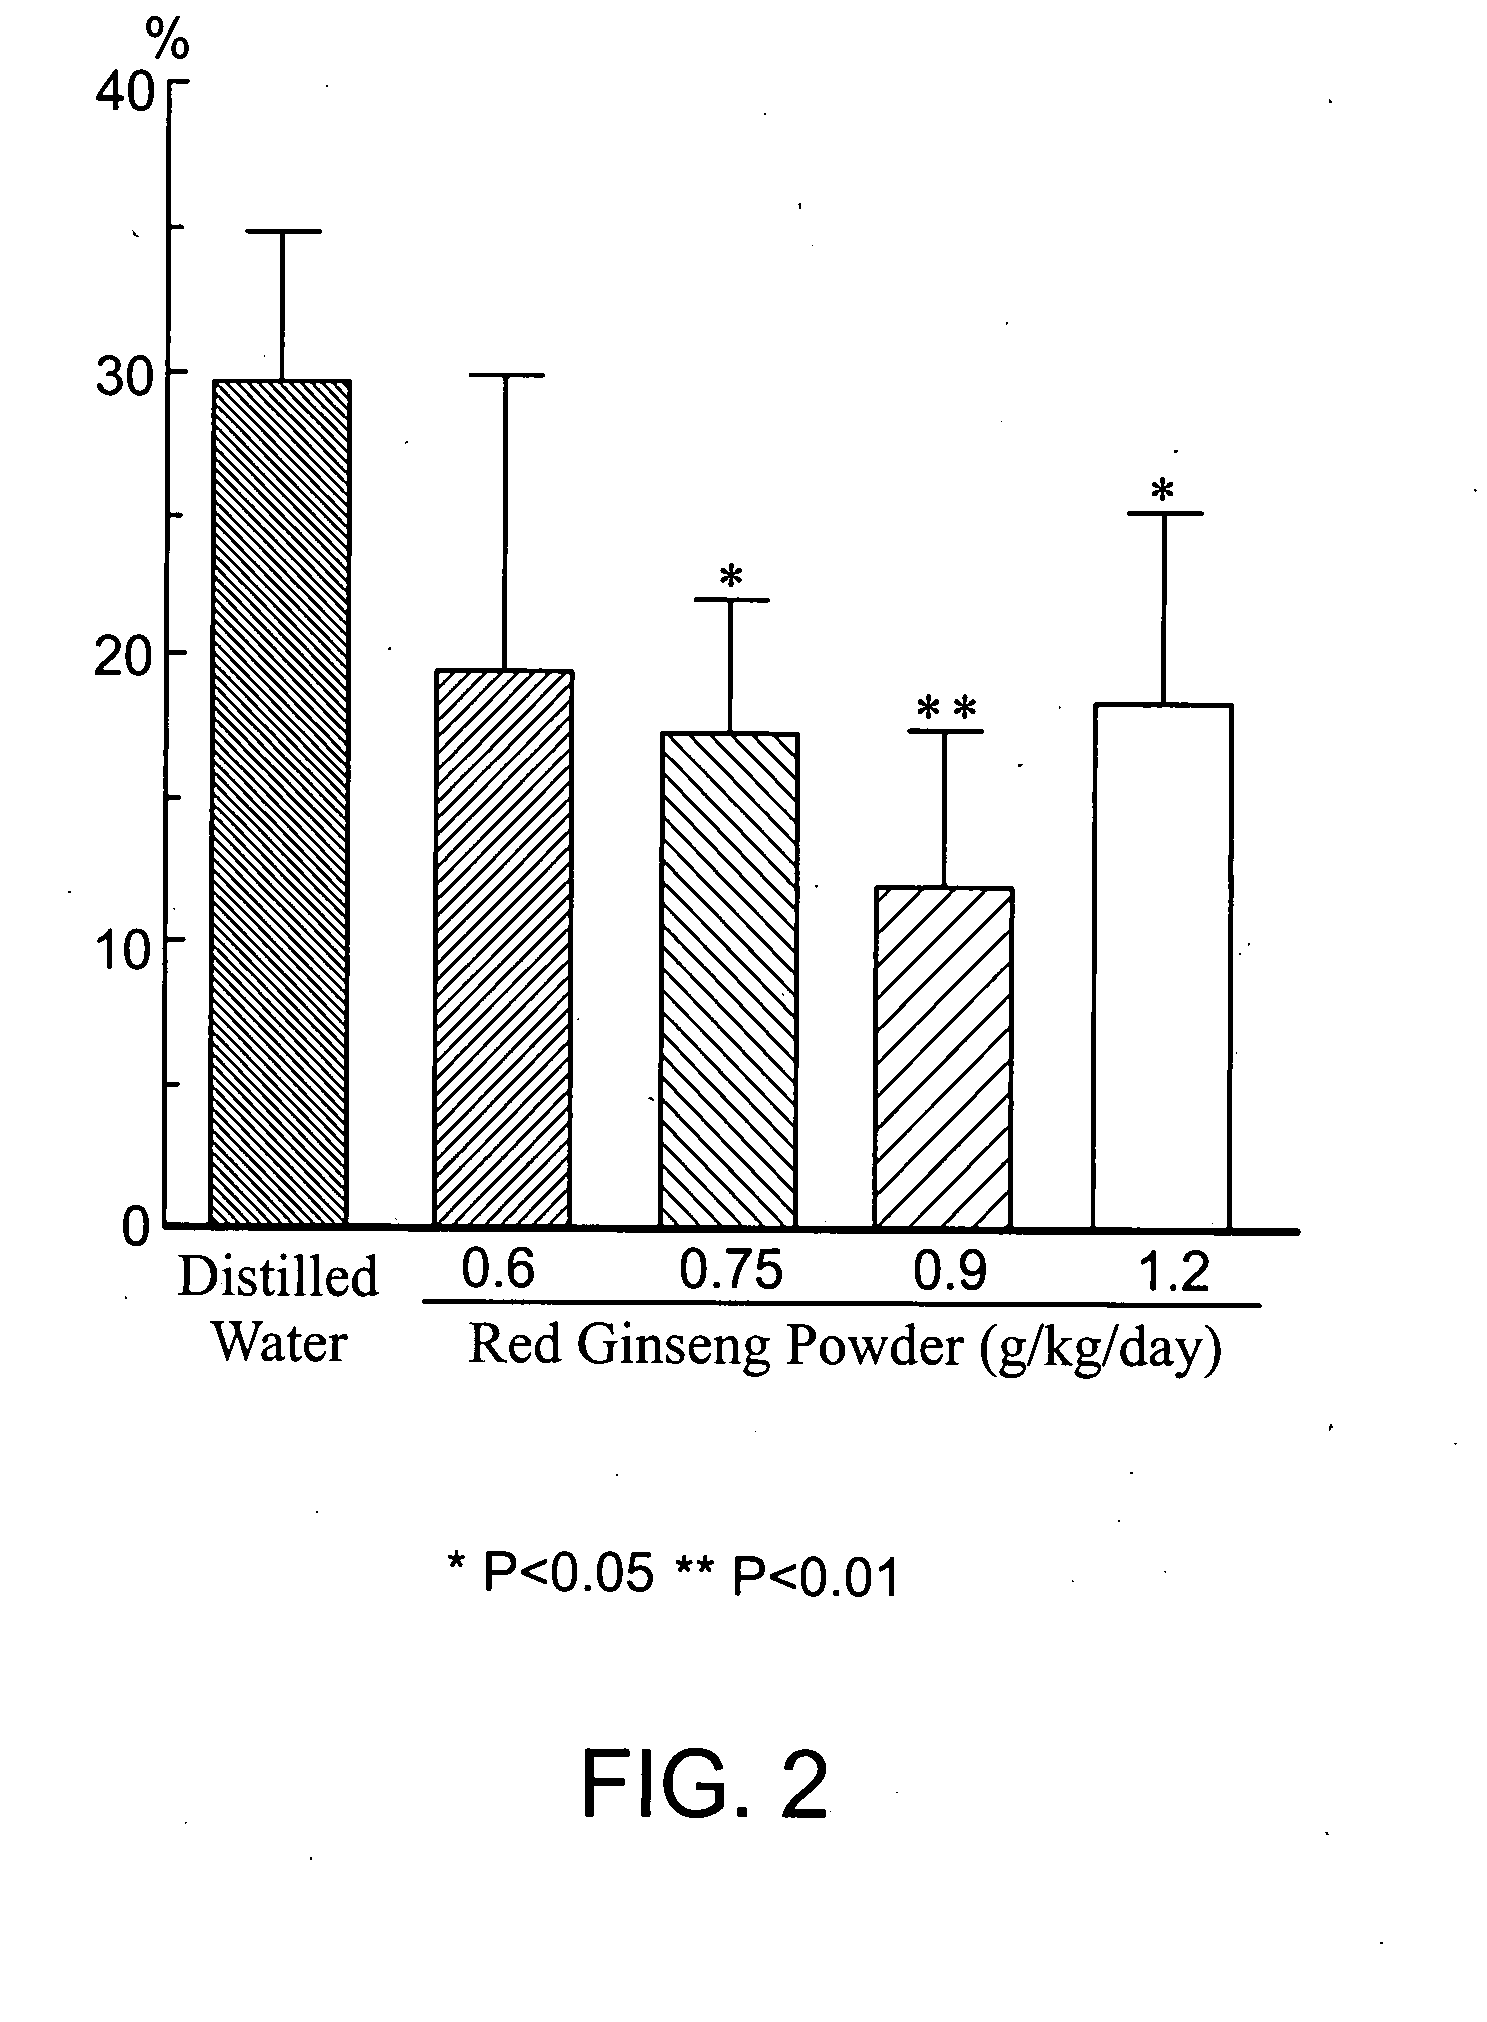 Brain cell- or nerve cell-protecting agents comprising medicinal ginseng